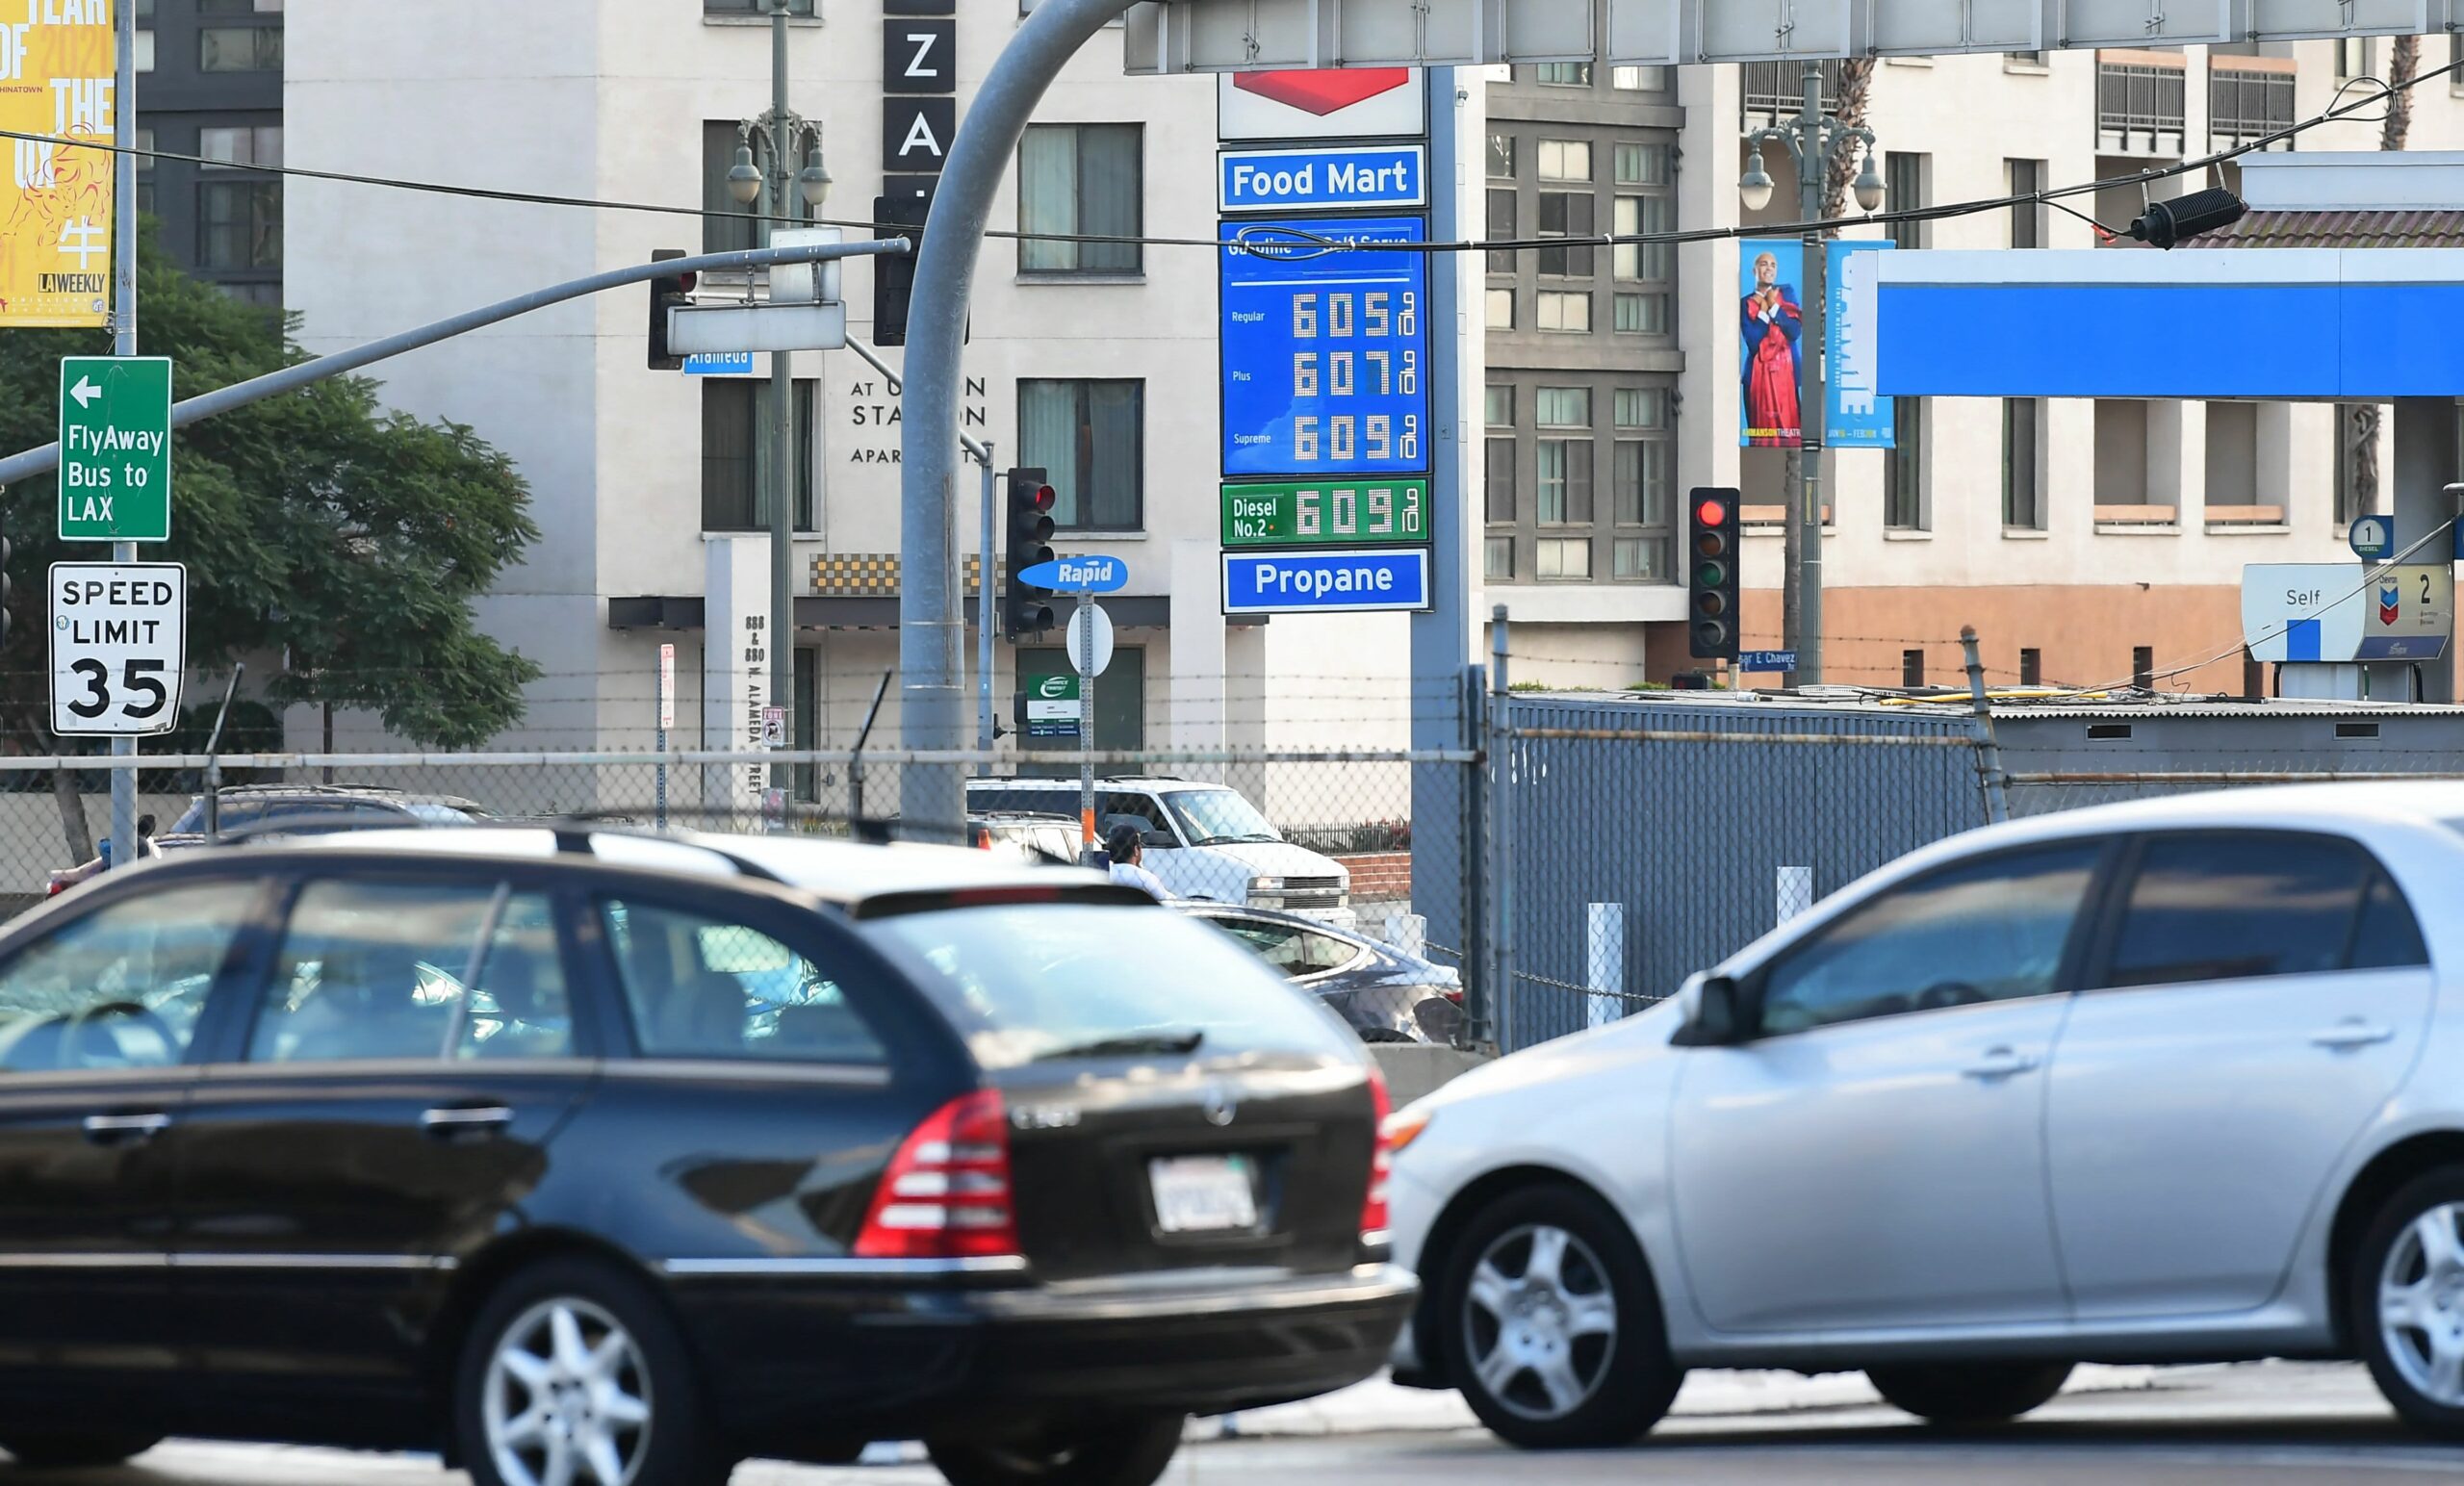 Gas prices climb to highest level in more than 7 years as oil surges above $90